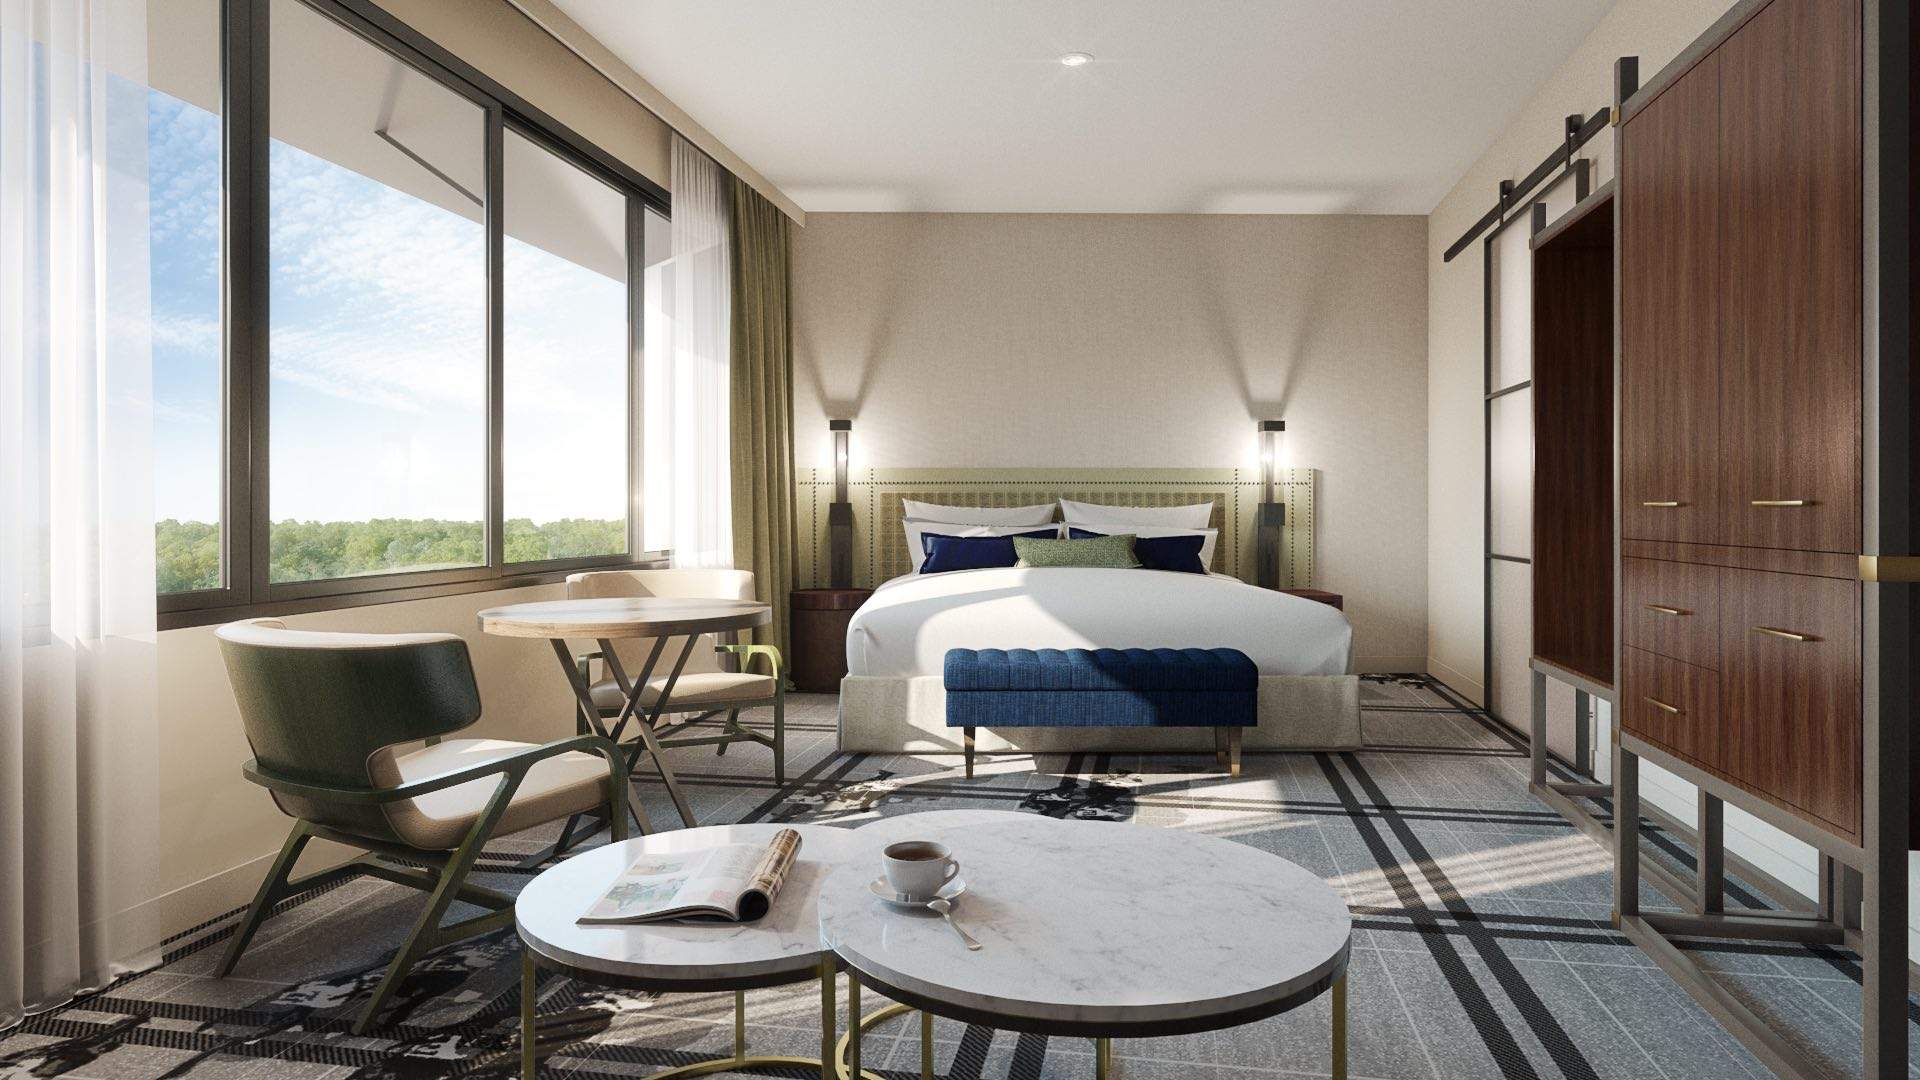 Western Sydney Is Getting a New Five-Star Hotel, Whisky Room and Rooftop Bar